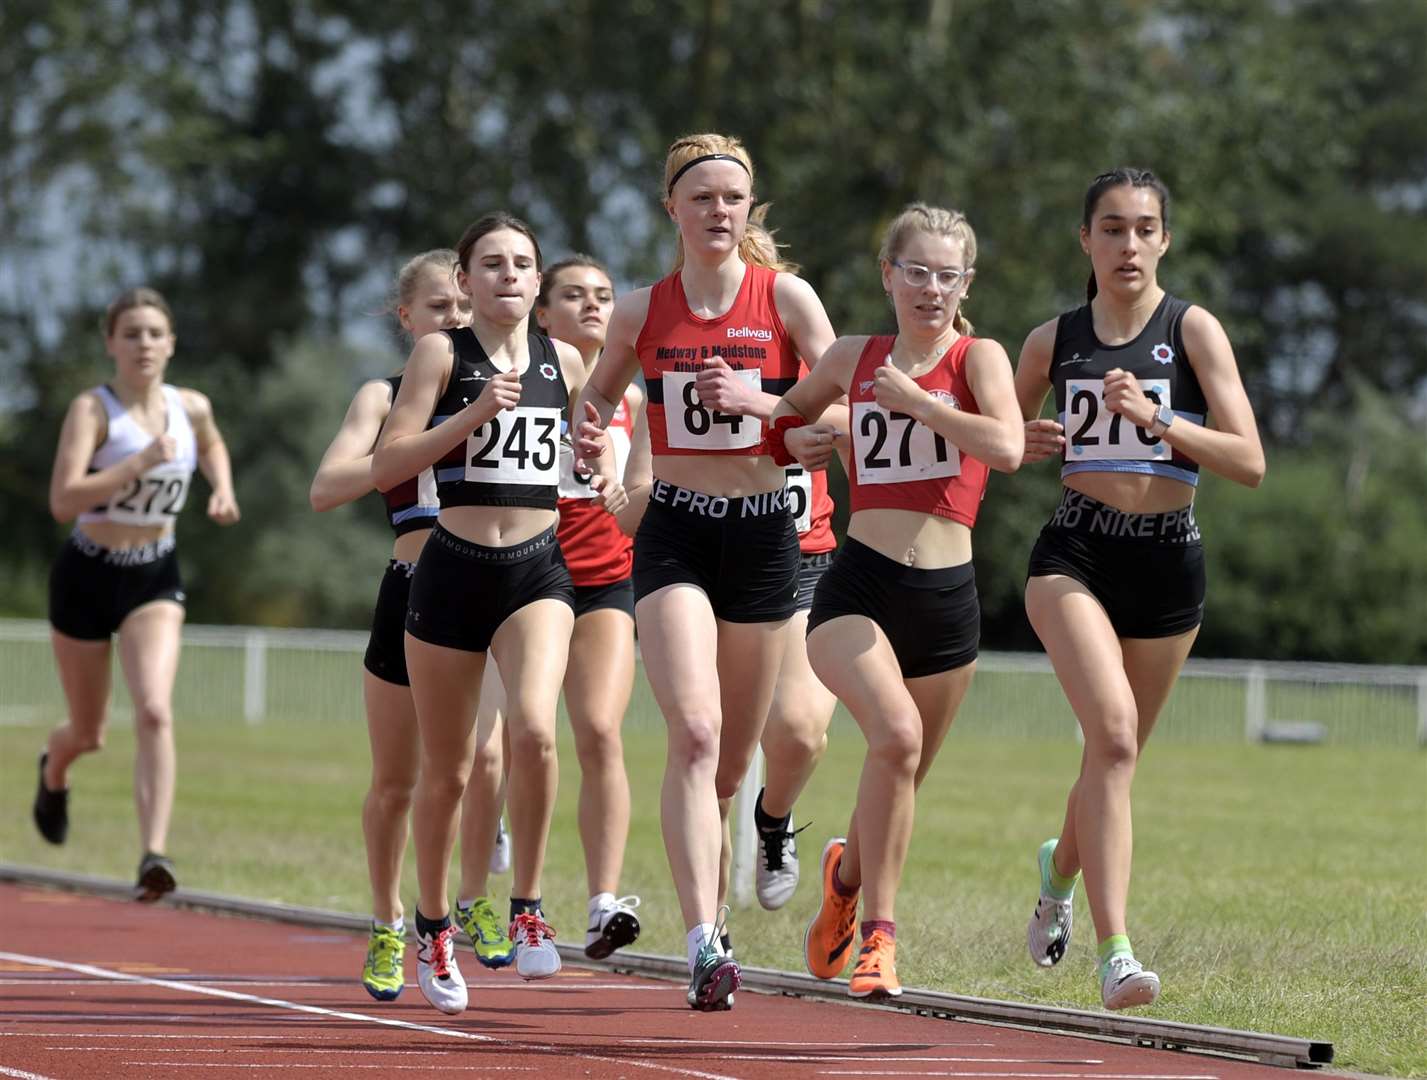 Action from the 1500m races at Ashford Picture: Barry Goodwin